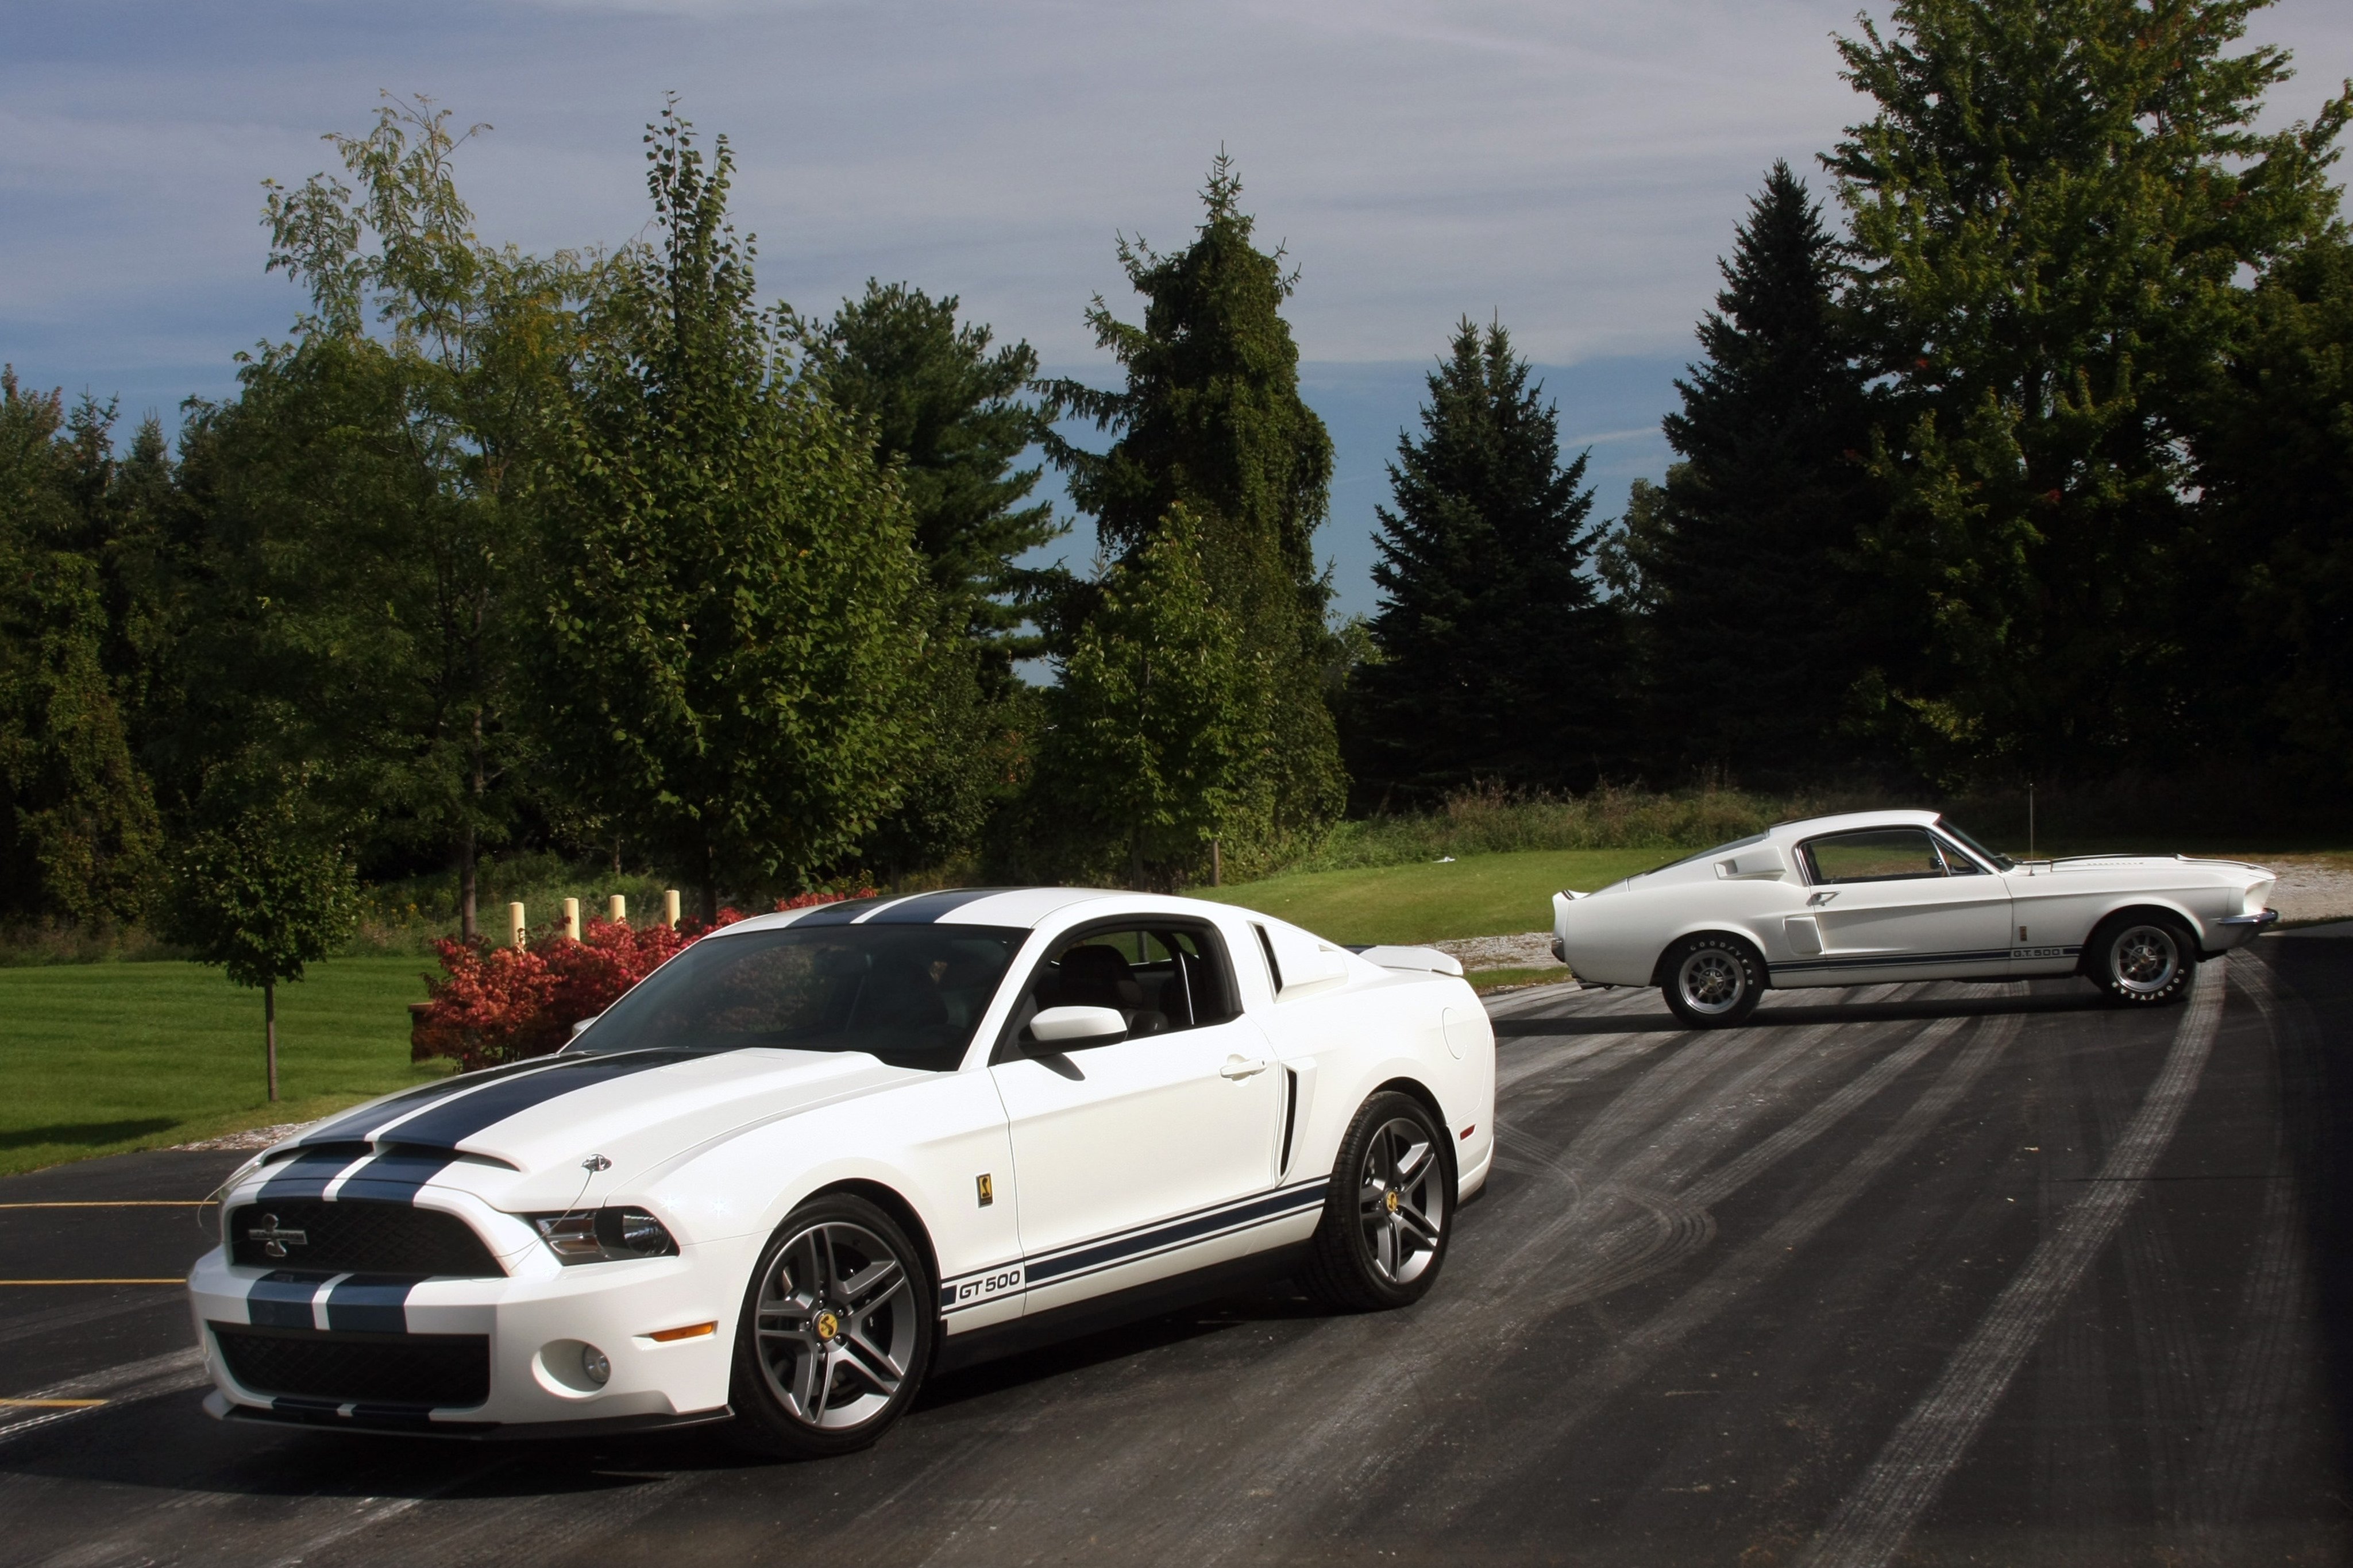 2010, Ford, Mustang, Shelby, Gt500, Patriot, Muscle, Super, Car, White, Usa, 4096x2730 02 Wallpaper